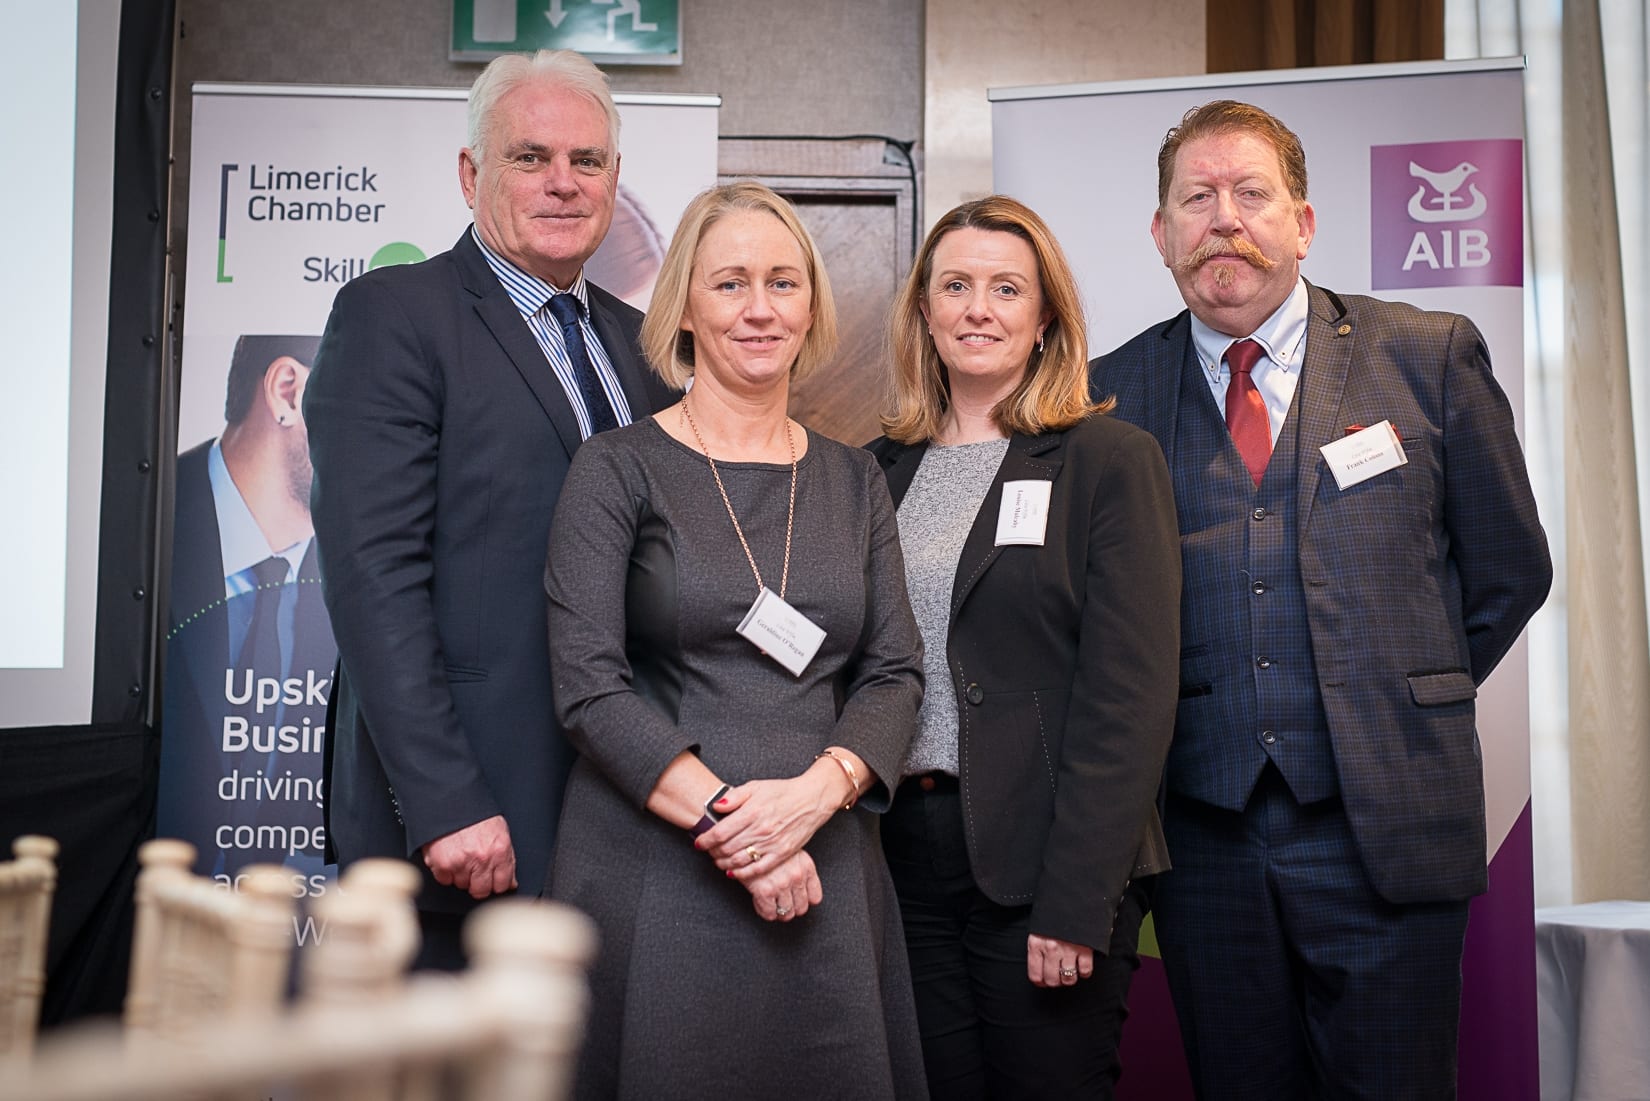 No repro fee- At the Limerick Chamber business briefing on ‘Spending Trends: Tourism, Retail &  Hospitality Industry Insights & Marketing Trends’ at the Savoy Hotel - 22-01-2019, From Left to Right:Gerry Casey, Geraldine O'Regan, Louise Mulcahy and Frank Collins all from Limerick's Live 95fm. 
Photo credit Shauna Kennedy